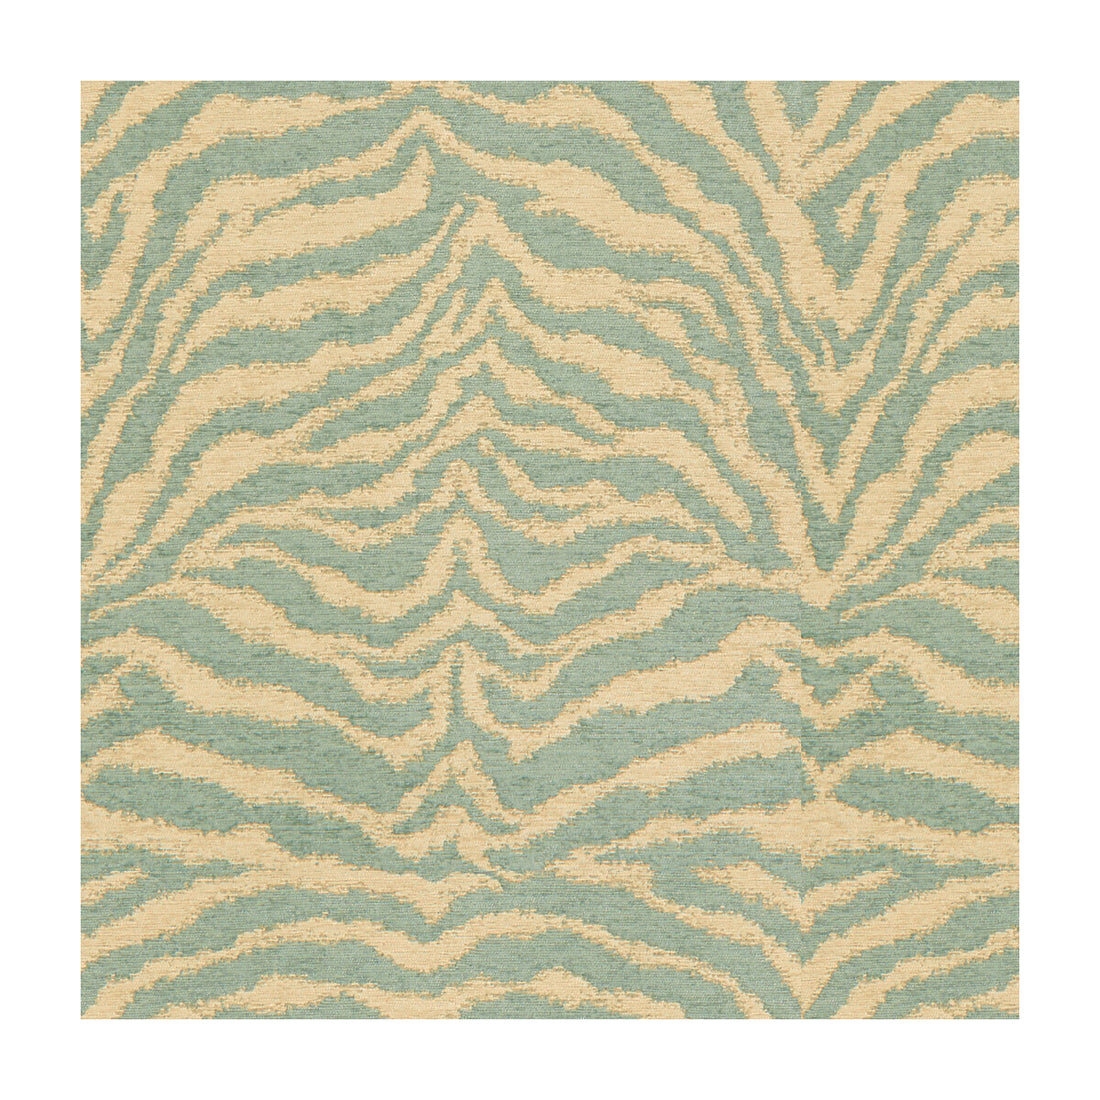 Adile fabric in seafoam color - pattern 33900.1615.0 - by Kravet Design in the Constantinople collection